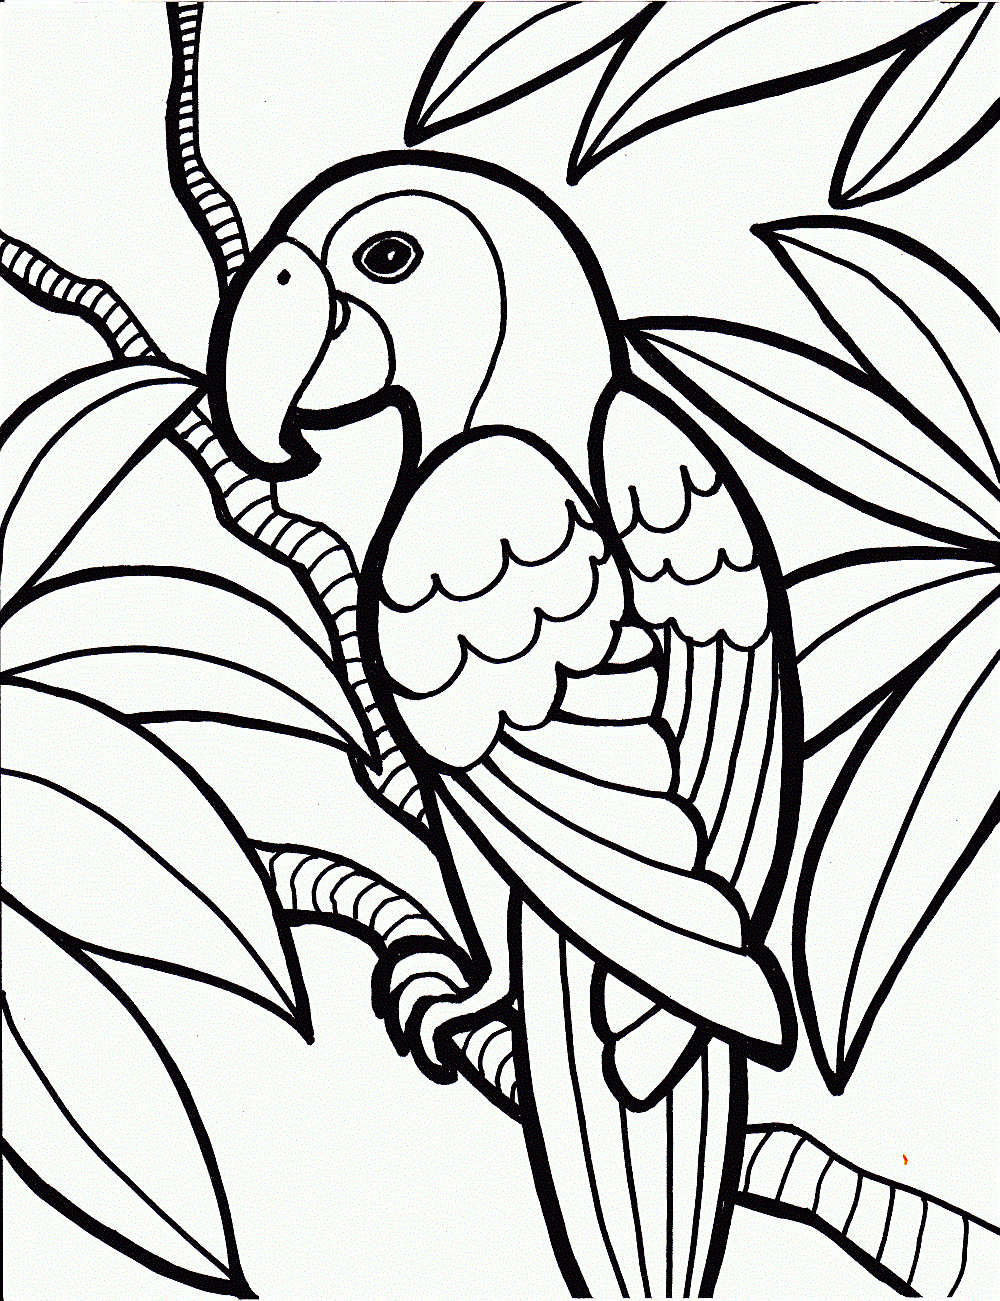 Printable Coloring Pages For Children
 beautiful parrot coloring pages for kids to color in